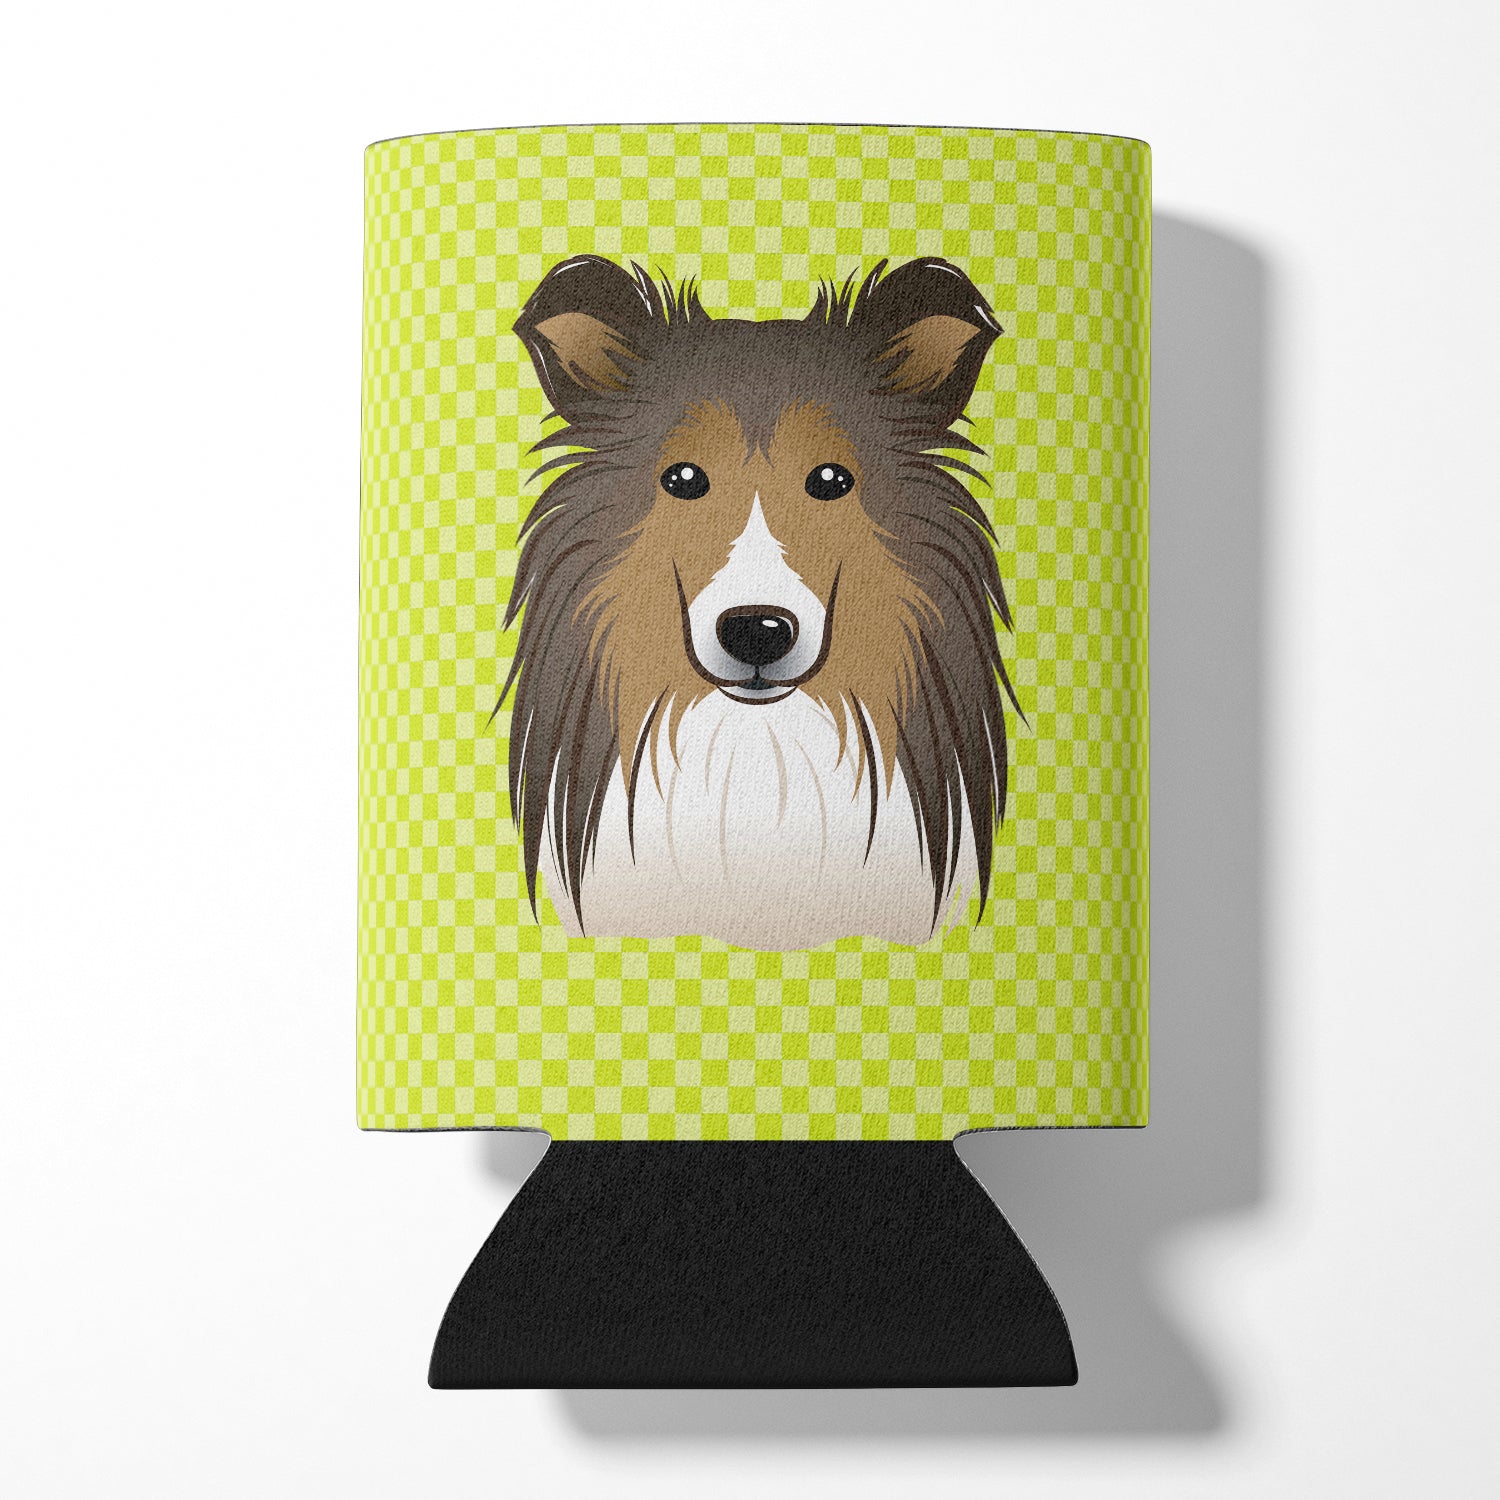 Checkerboard Lime Green Sheltie Can or Bottle Hugger BB1304CC.